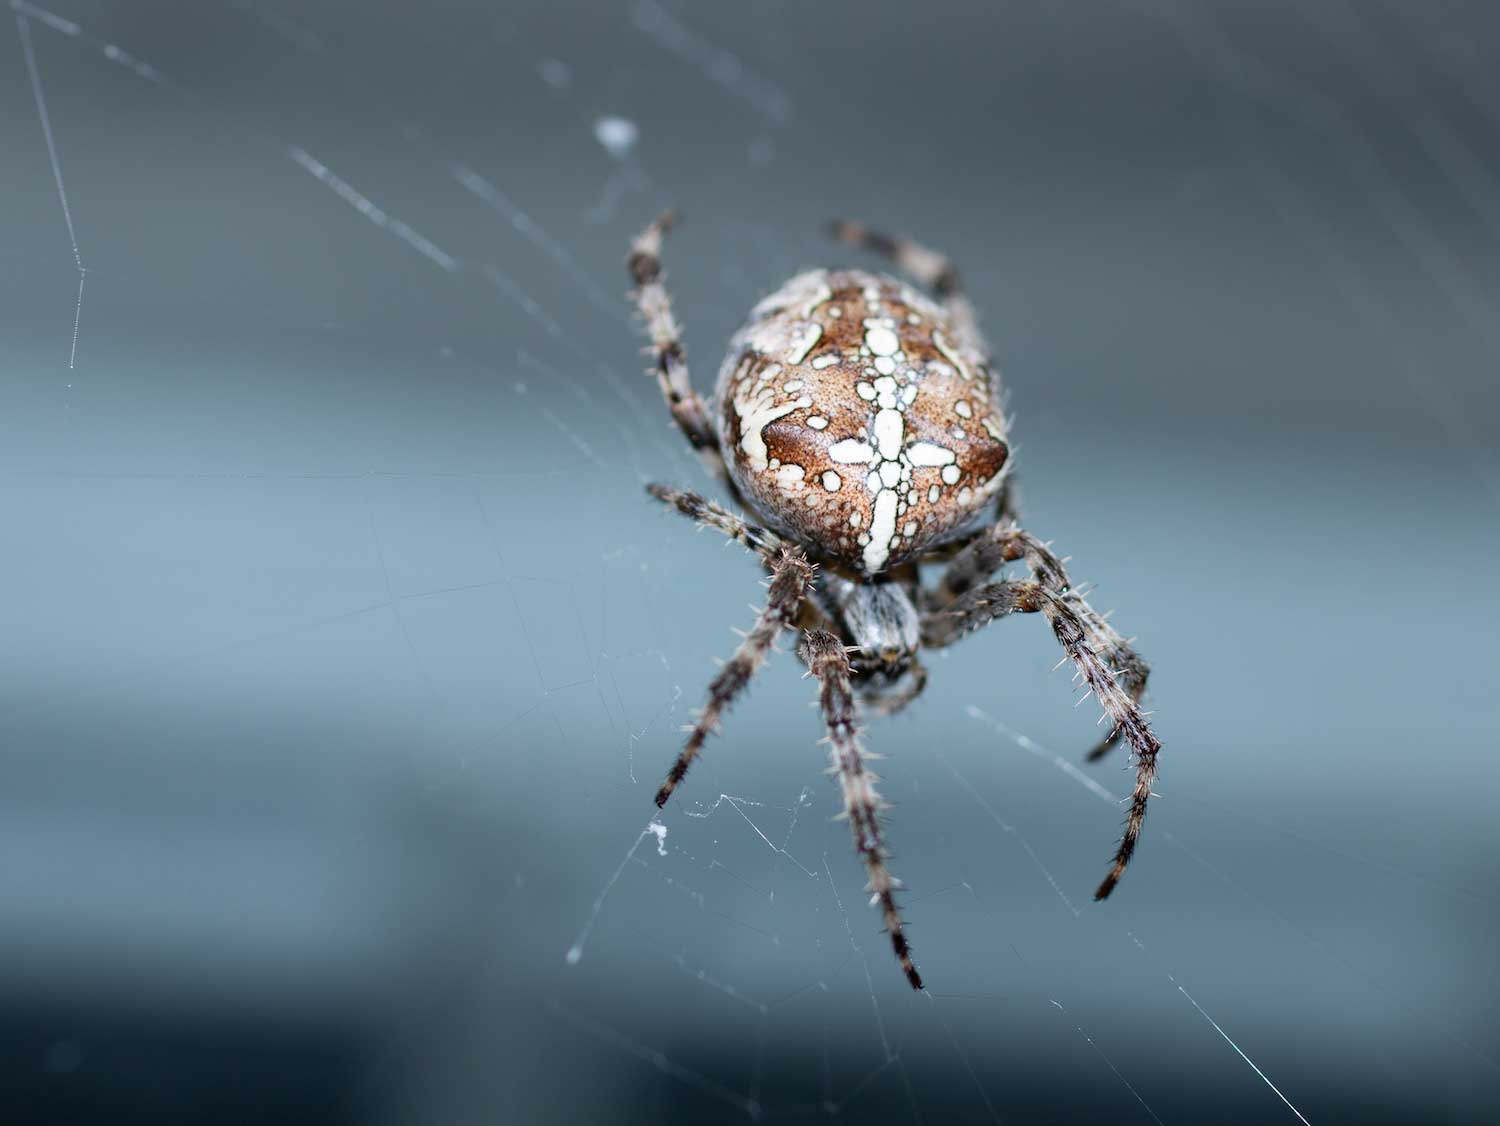 Spiders, facts and information